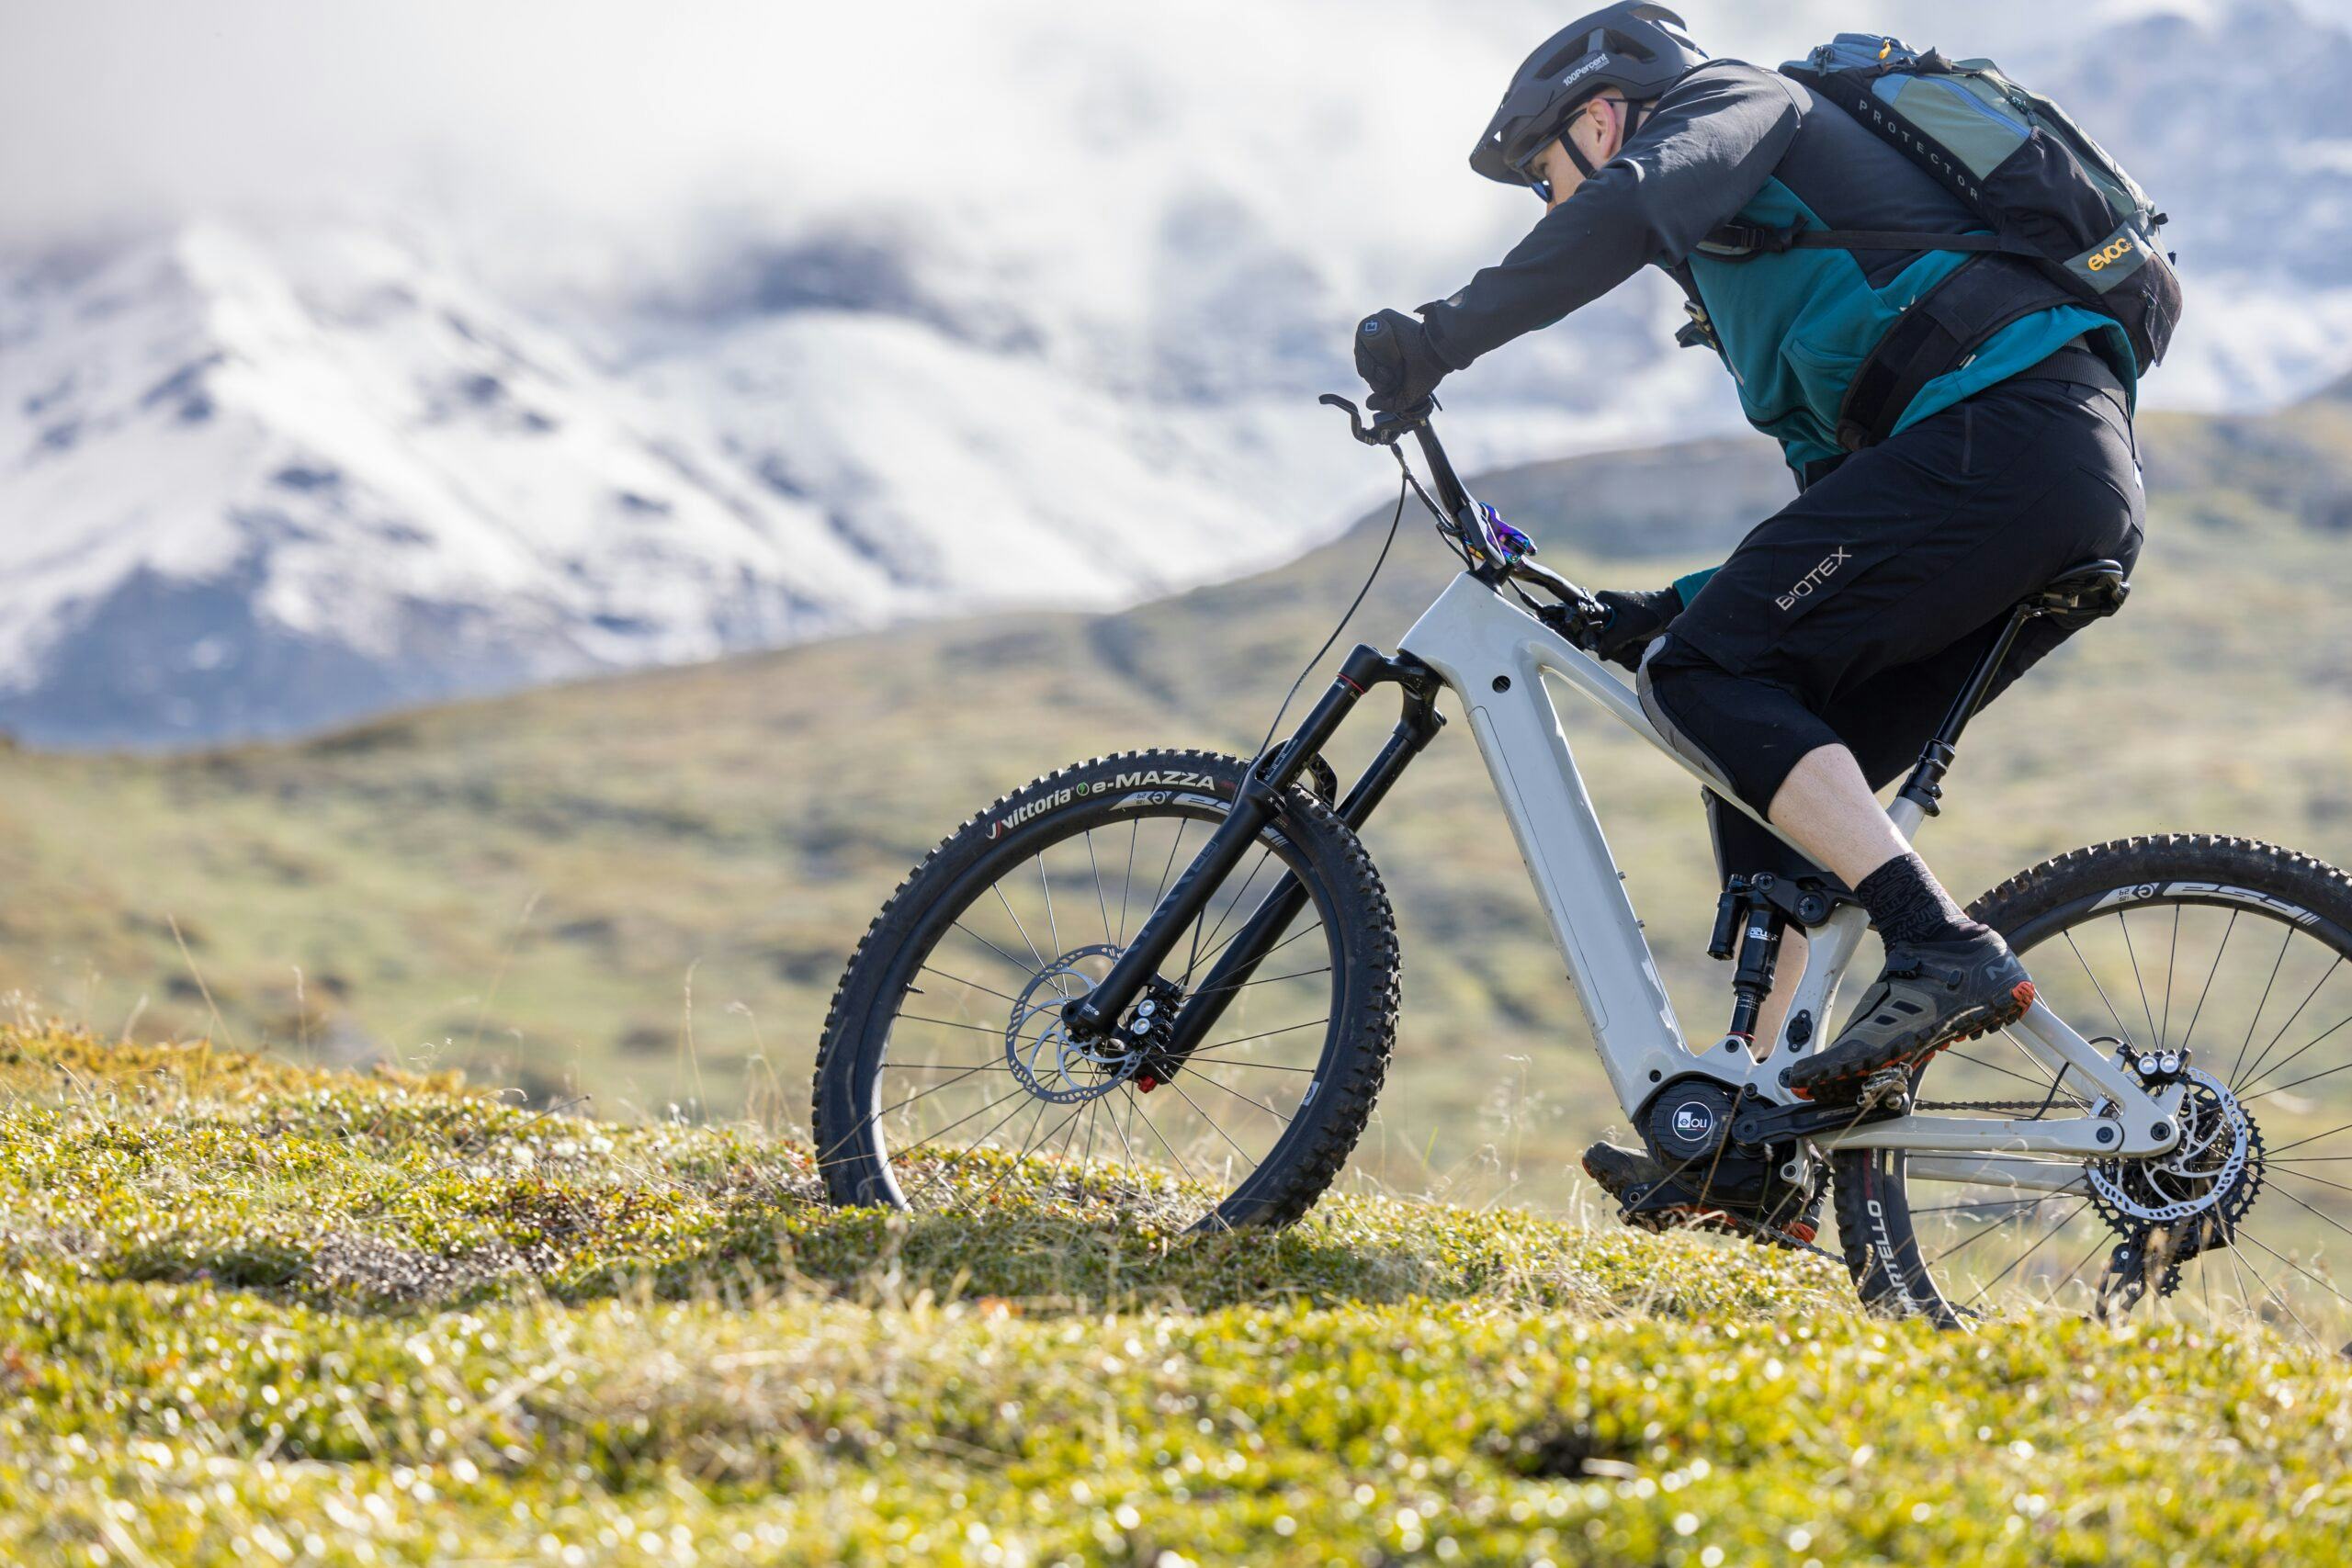 OLI ebike systems introduces new drive unit and user interface